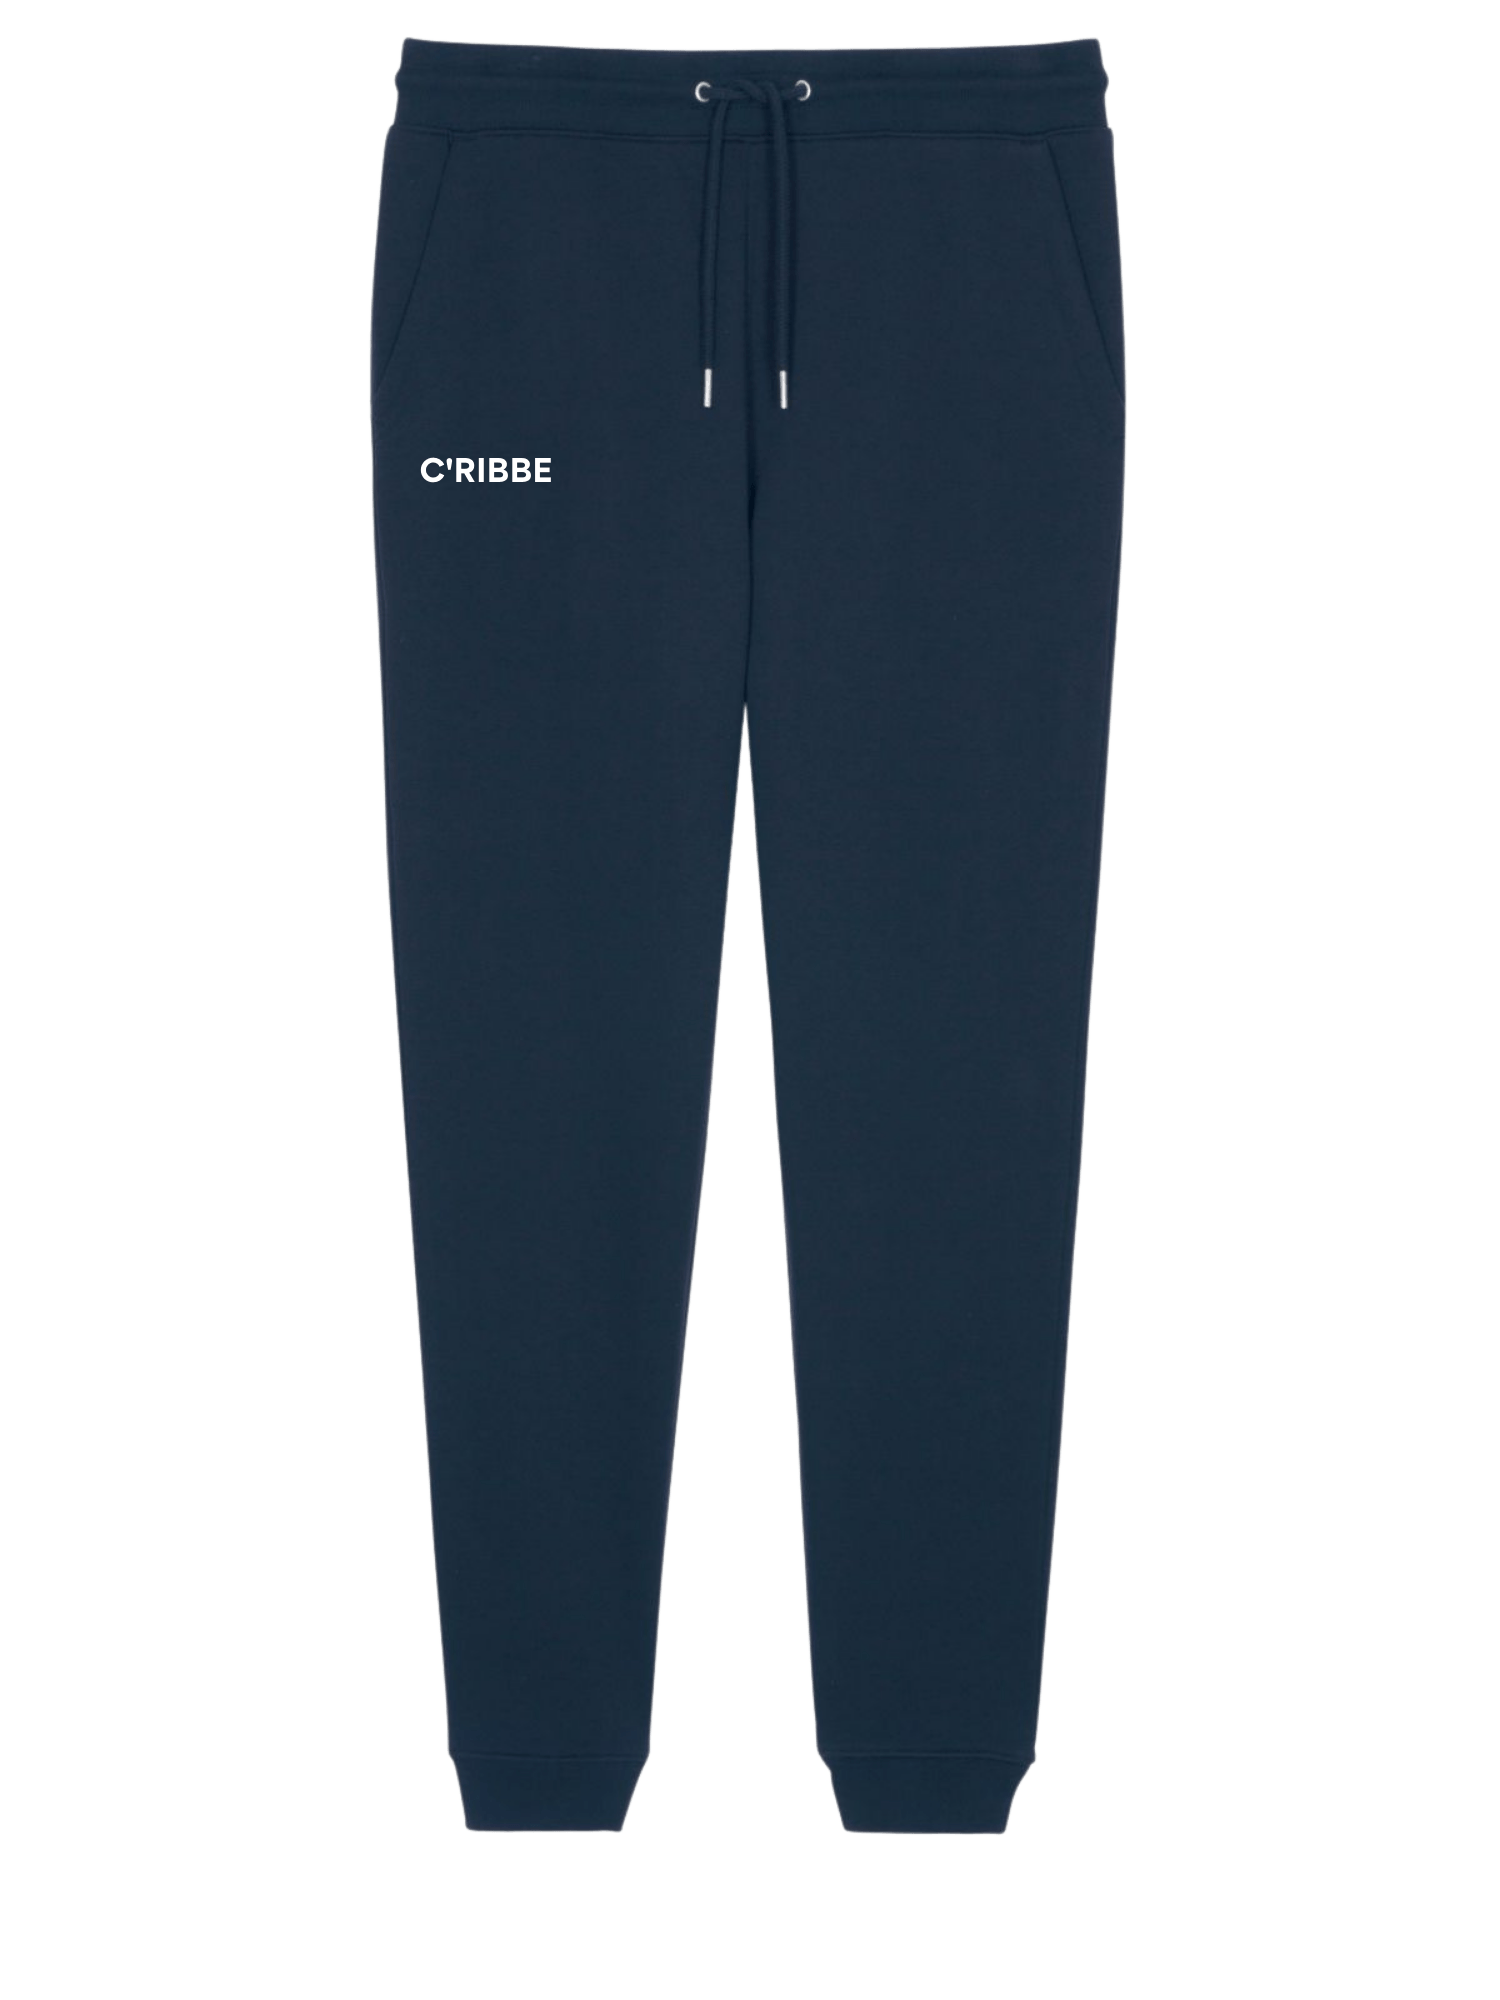 C'RIBBE Signature Print Jogging Bottoms French Navy